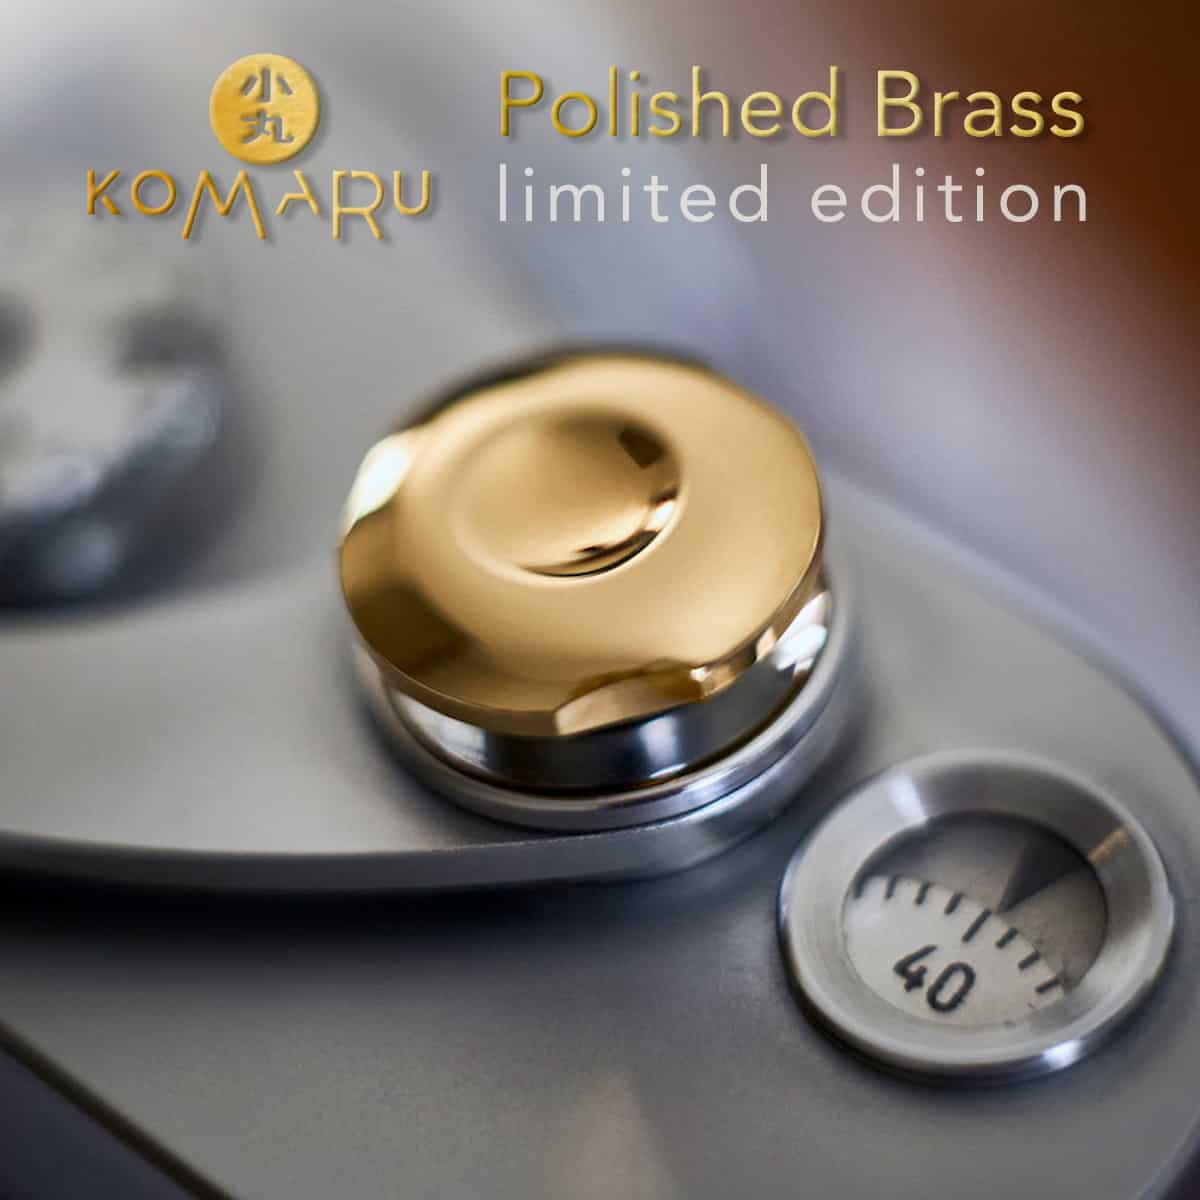 Komaru Polished Brass Limited Edition Soft Release Button - For Leica